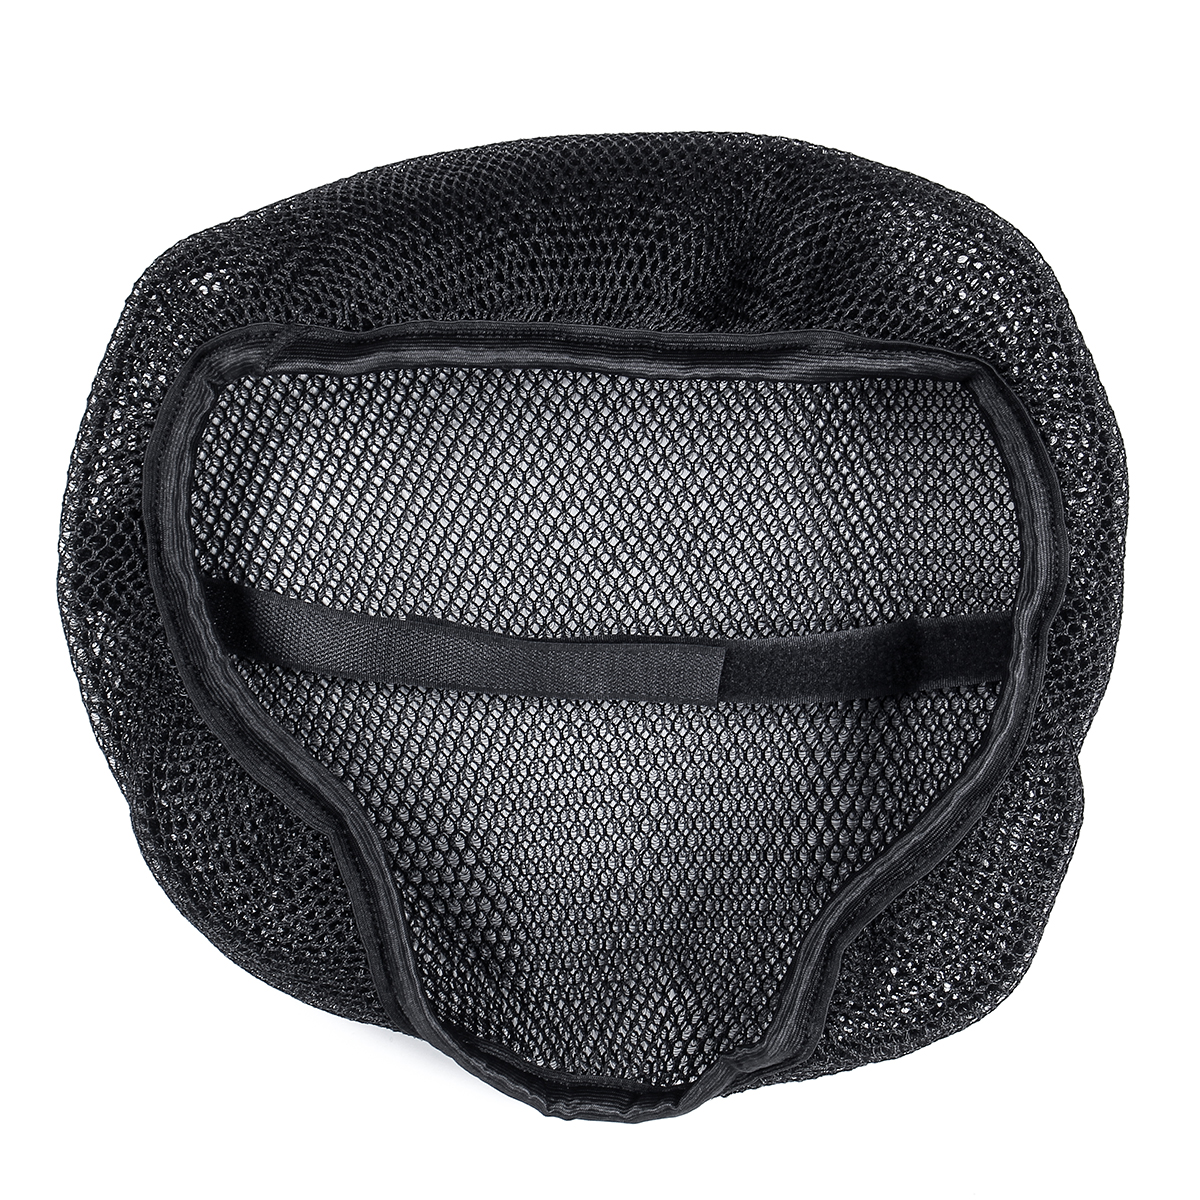 Motorcycle Black Front Rear Seat Net Covers Pad Guard Breathable for BMW R1200GS ADV 2006-2012/2013-2018